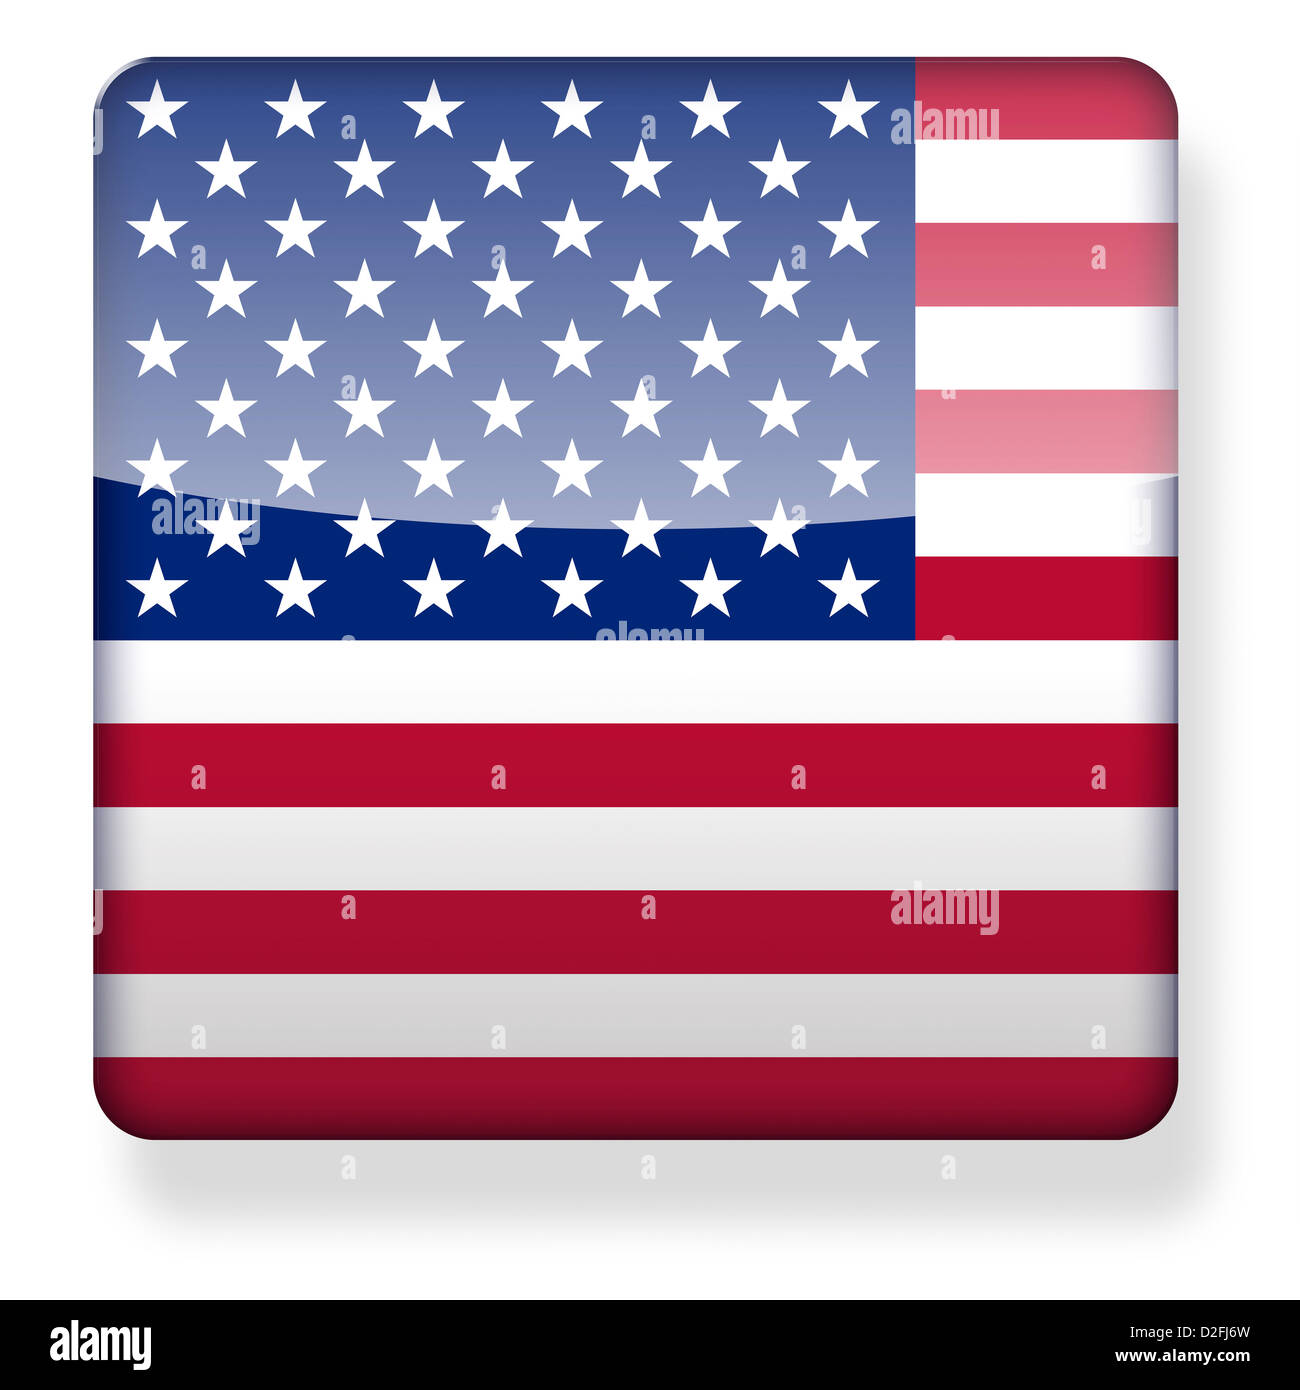 US flag as an app icon. Clipping path included. Stock Photo